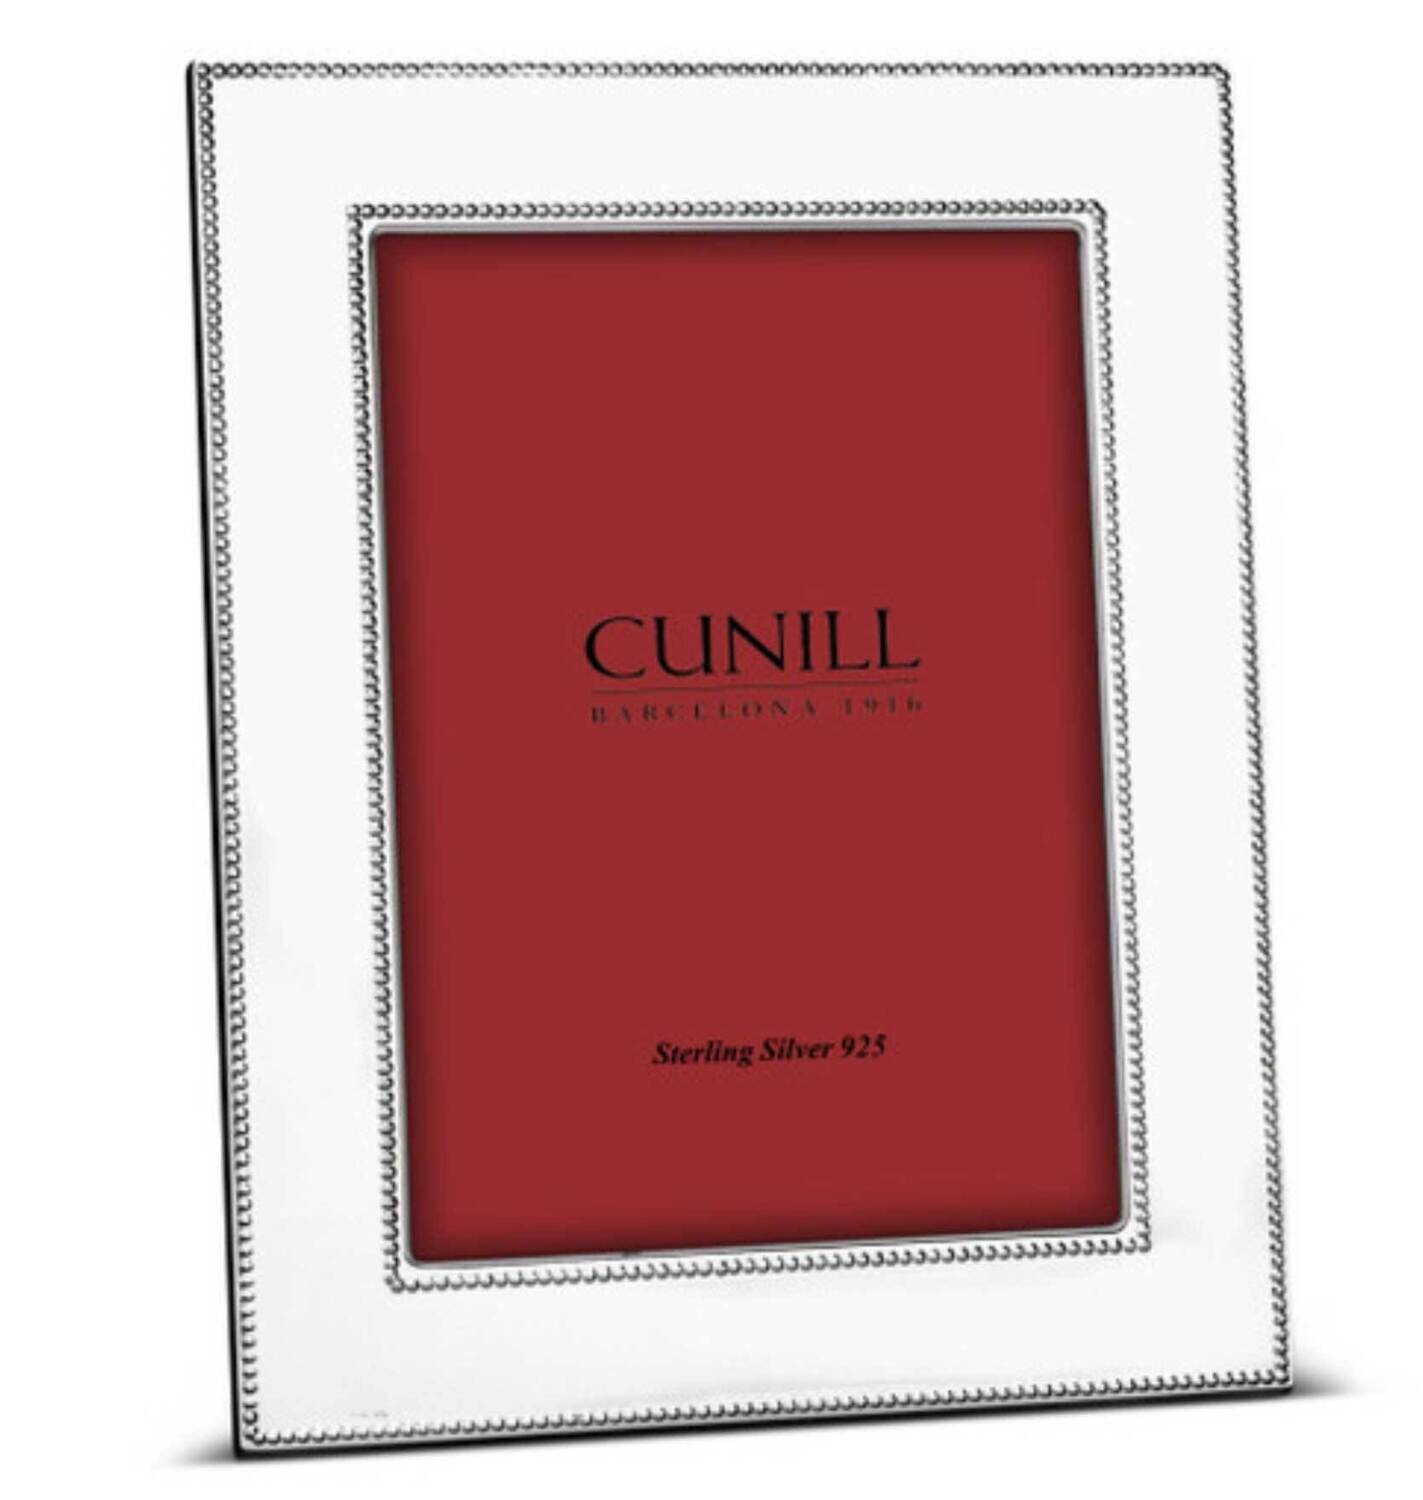 Cunill Double Bead Wide 8x10 Inch Picture Frame .925 Sterling Silver 100079